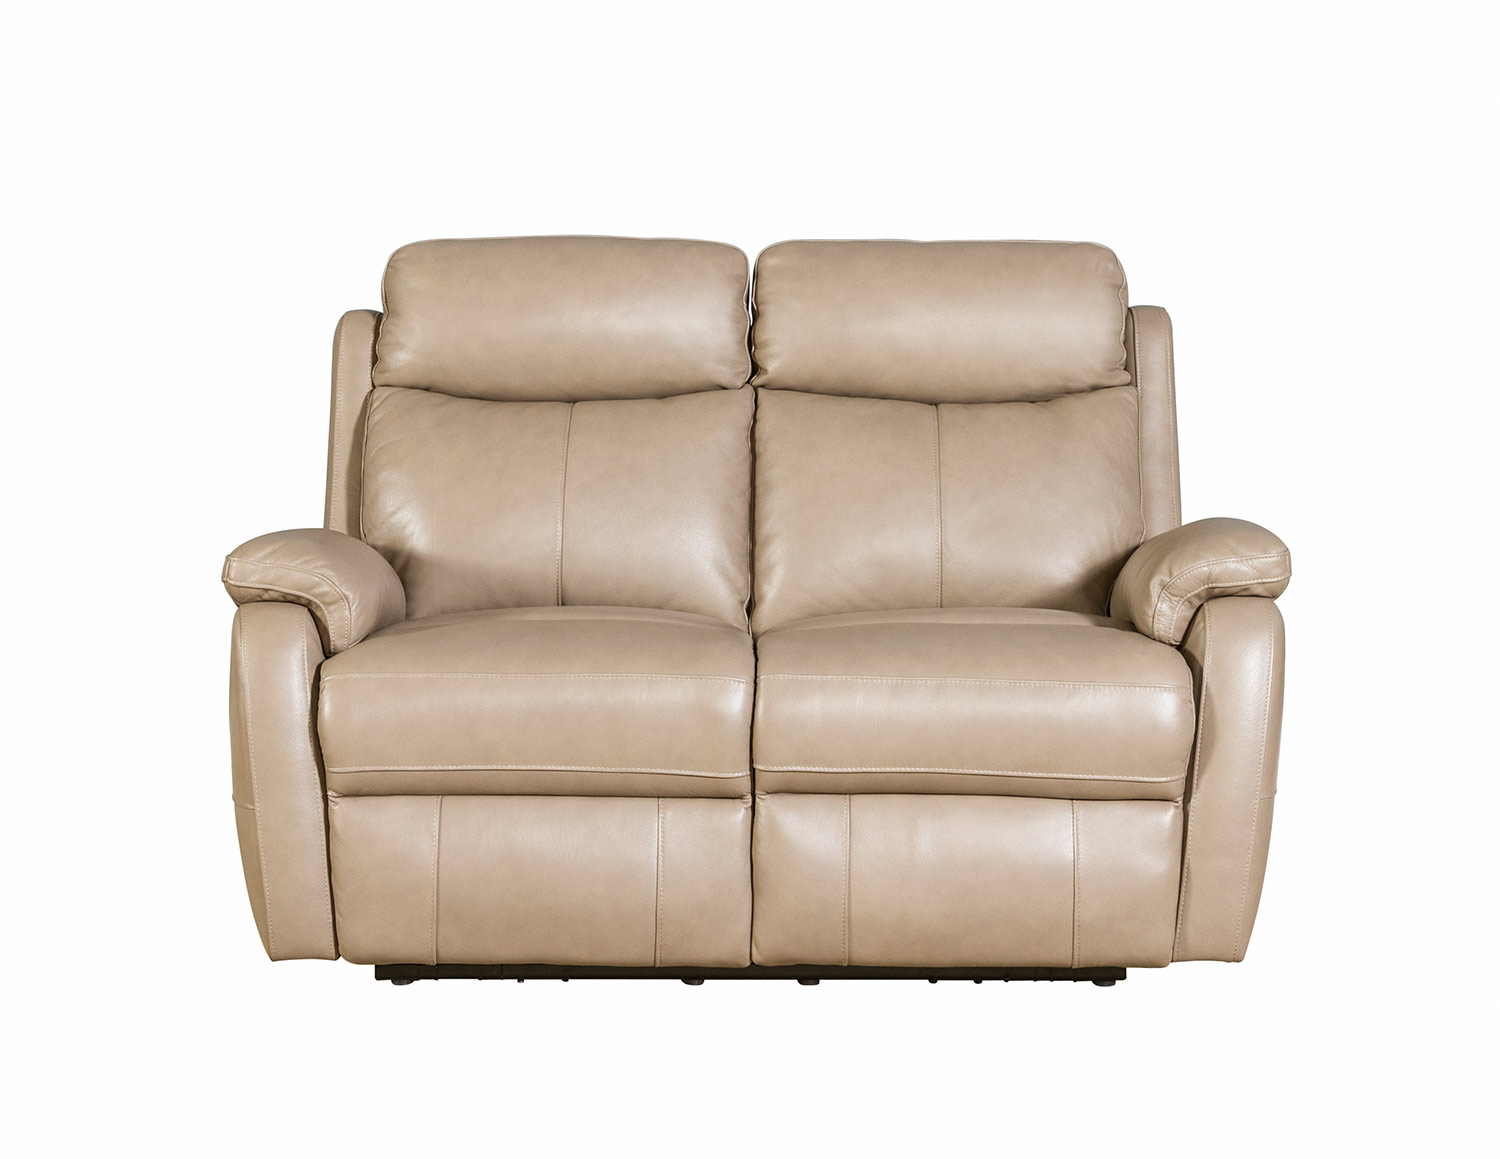 Barcalounger Brockton Power Reclining Loveseat with Power Head Rests - Gable Twine/Leather Match